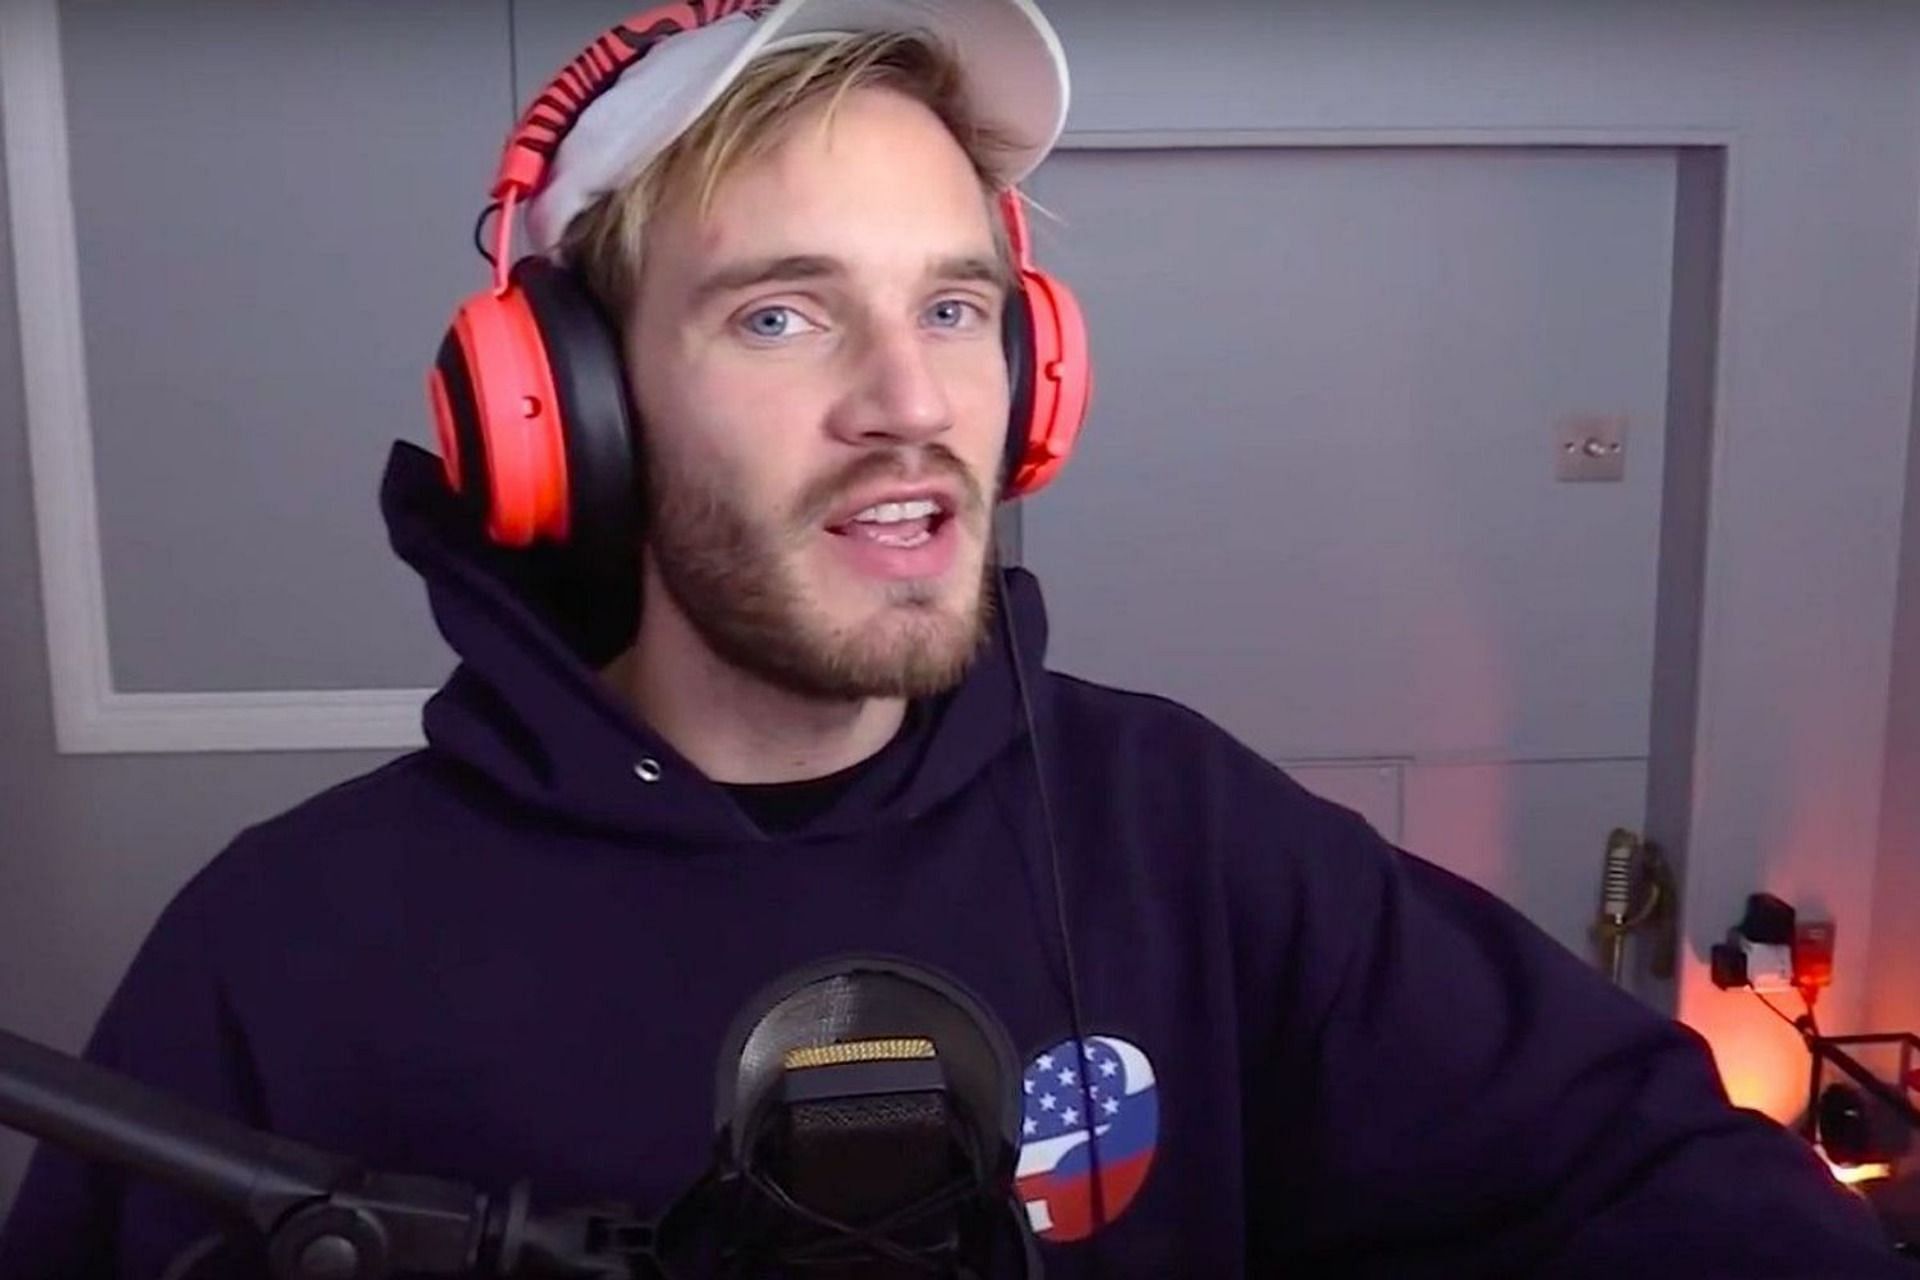 How Much Does Pewdiepie Make Per Video Youtubers Stunning Fortune In 2022 Explored 4348